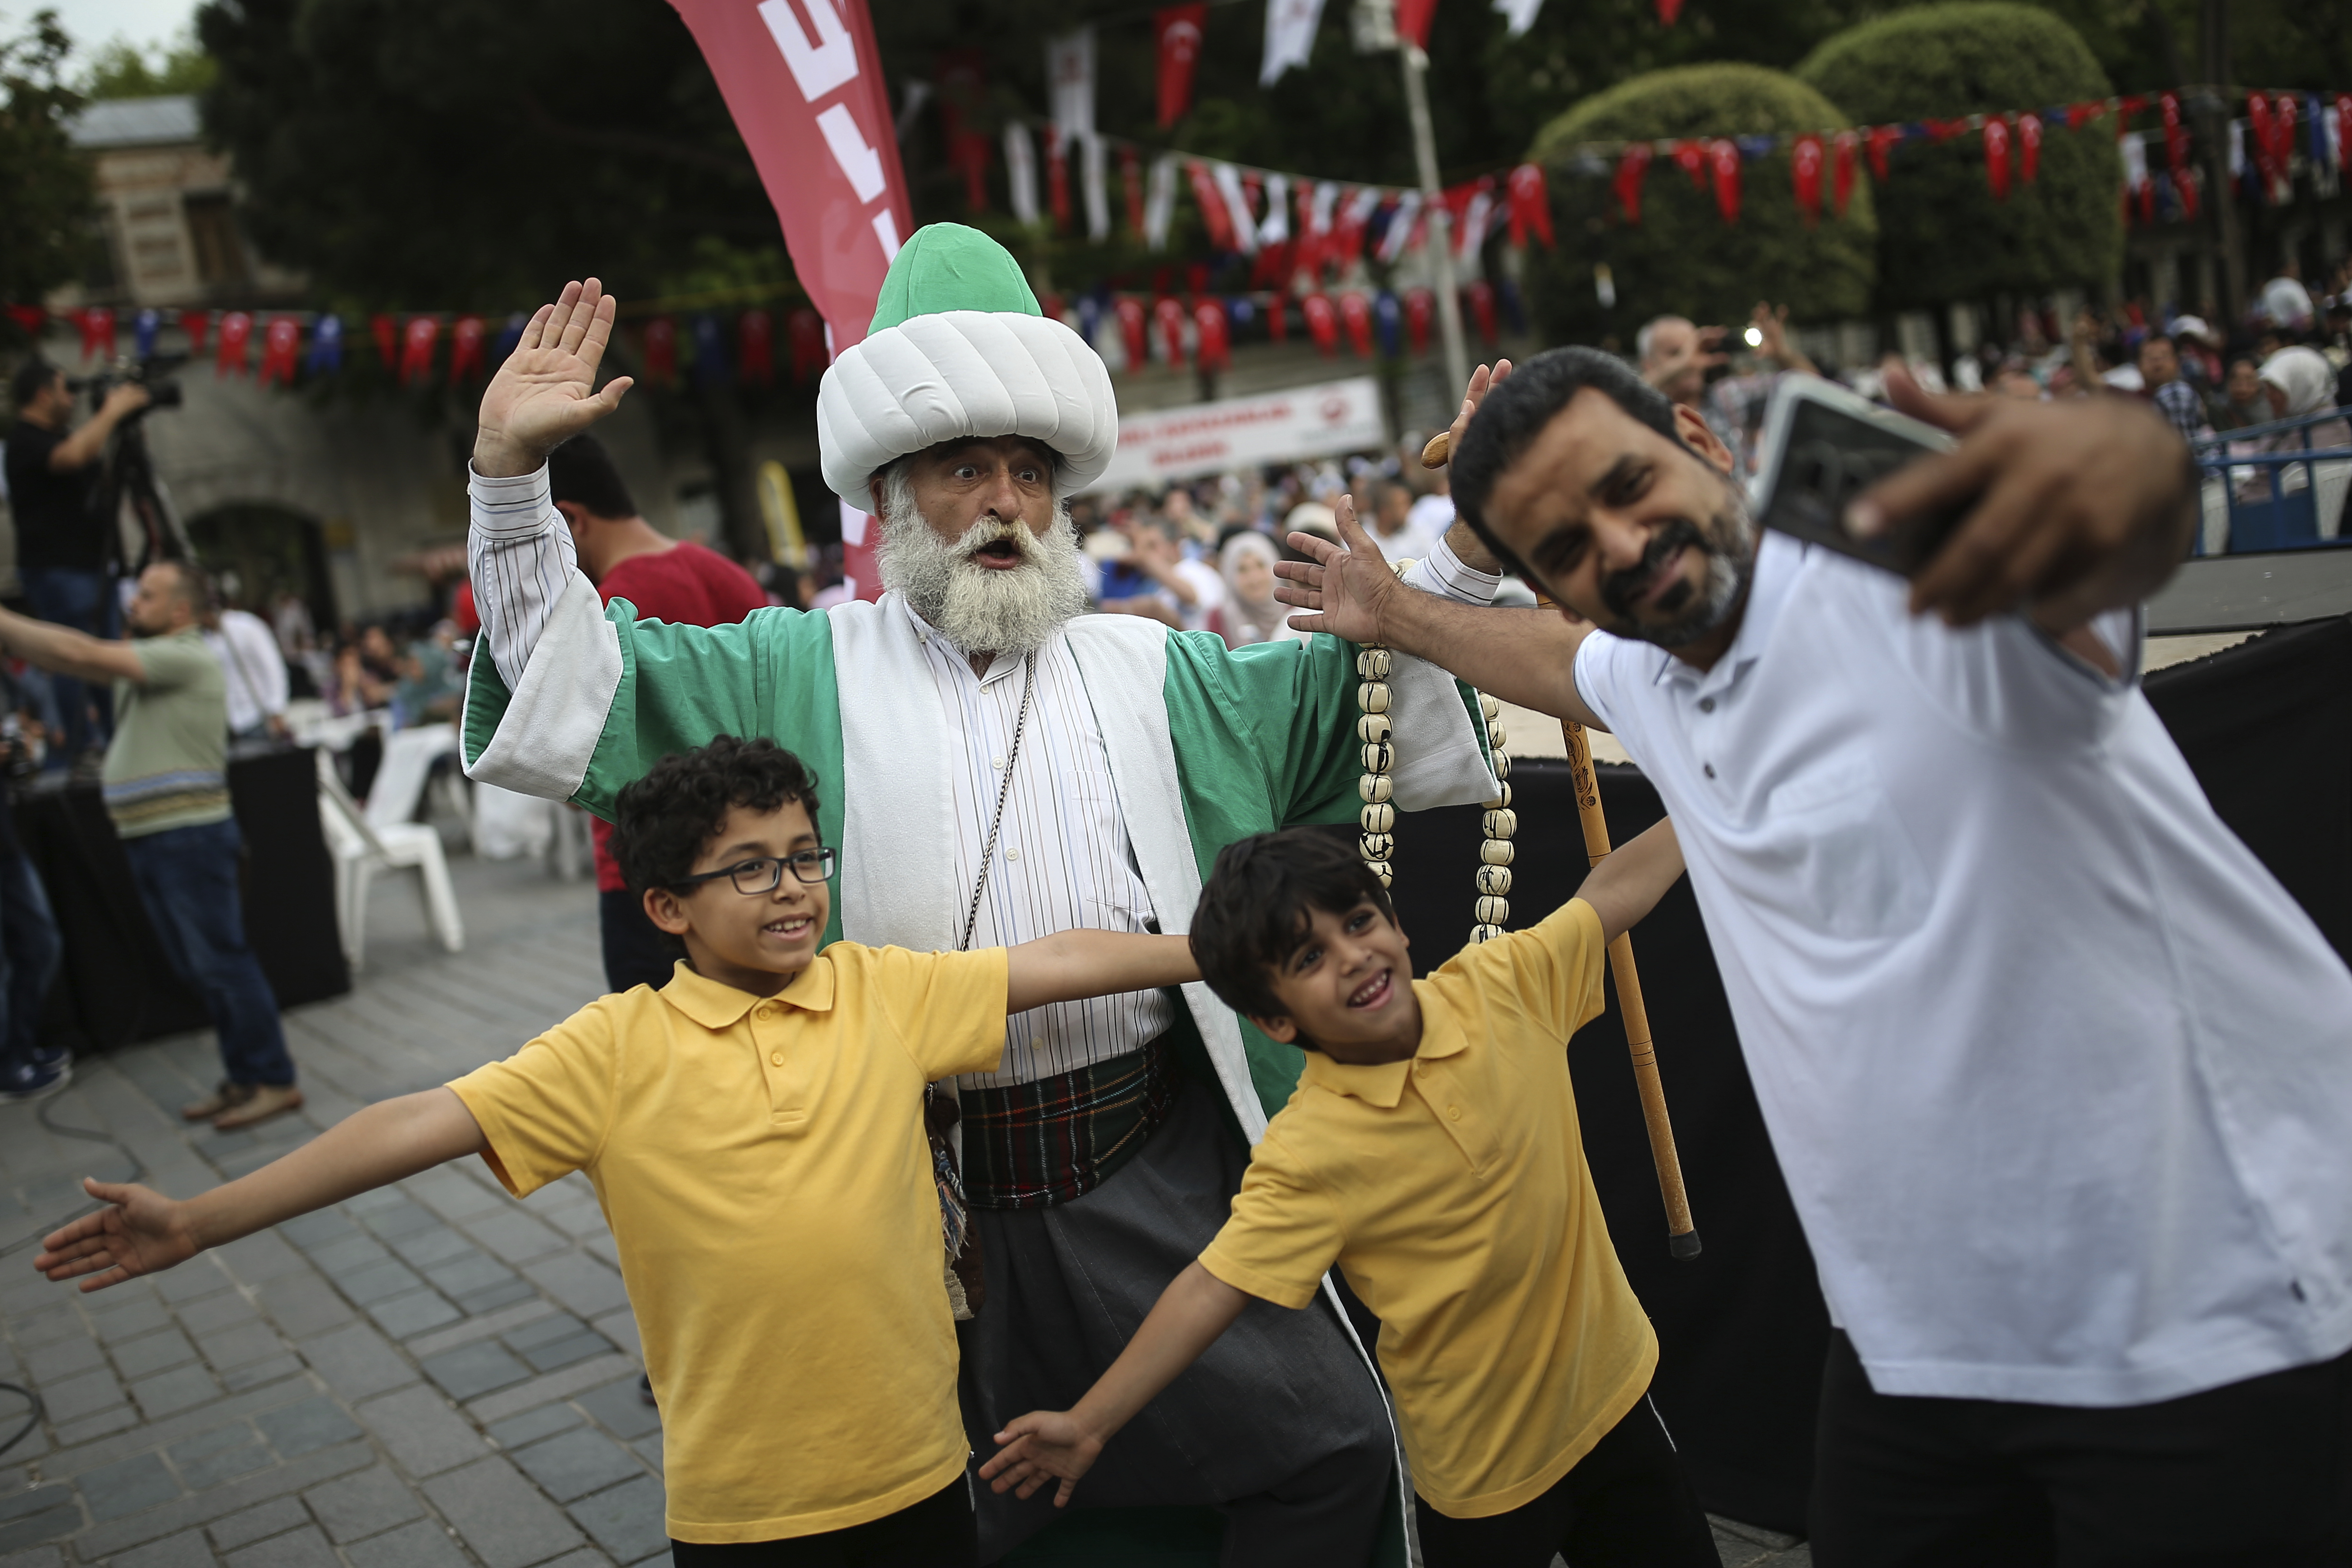 A man in Ottoman attire poses for pictures with a family as people prepare to break their fast in the historic Sultanahmet district of Istanbul, Wednesday, May 16, 2018 on the first day of the fasting month of Ramadan. Muslims throughout the world are marking Ramadan - a month of fasting during which the observants abstain from food, drink and other pleasures from sunrise to sunset. After an obligatory sunset prayer, a large feast known as 'iftar' is shared with family and friends. (AP Photo/Emrah Gurel)